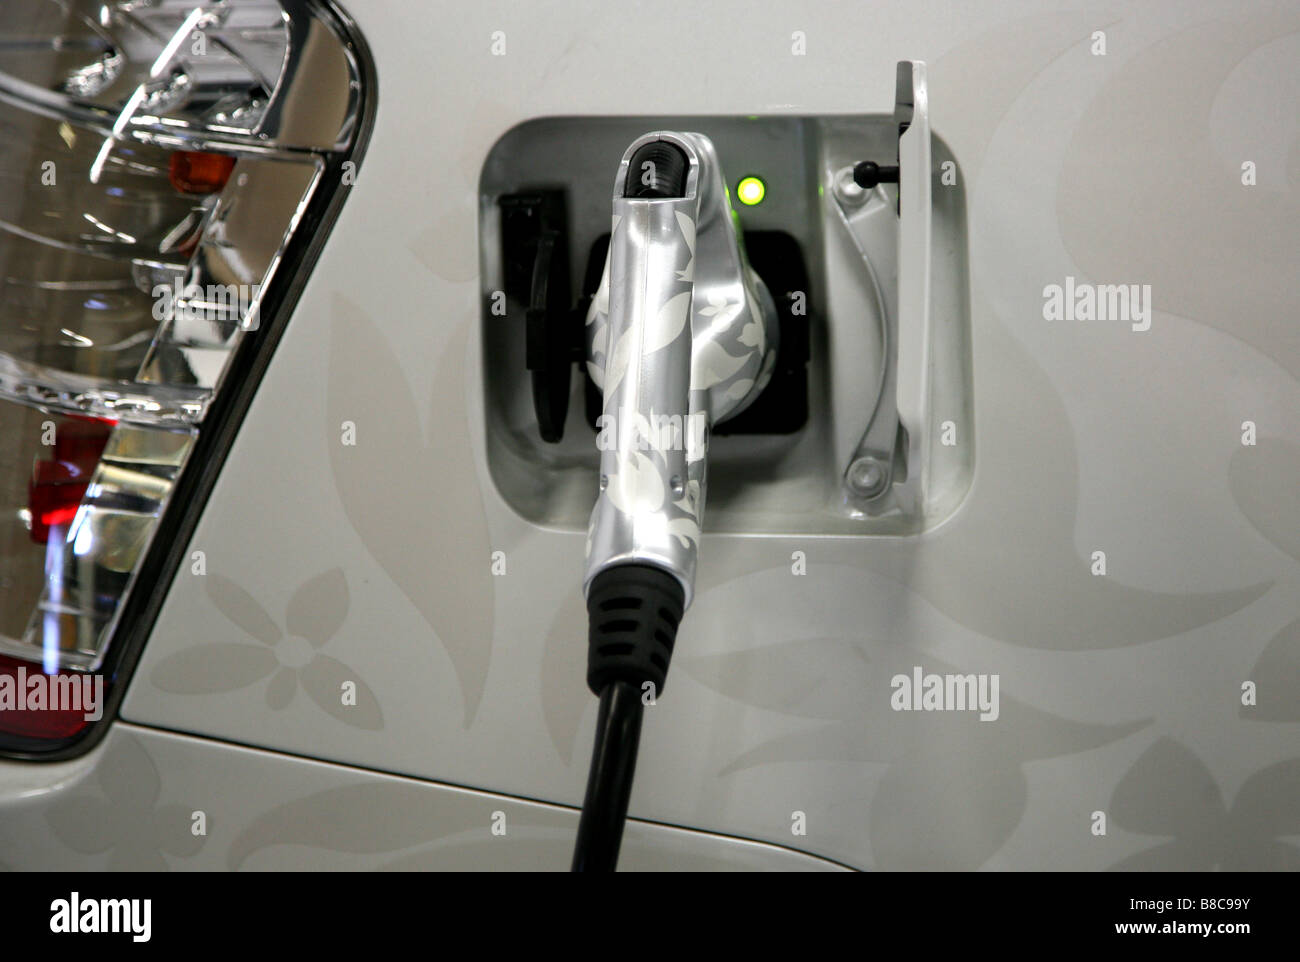 Toyota Prius hybrid car recharging batteries EDITORIAL USE ONLY Stock Photo